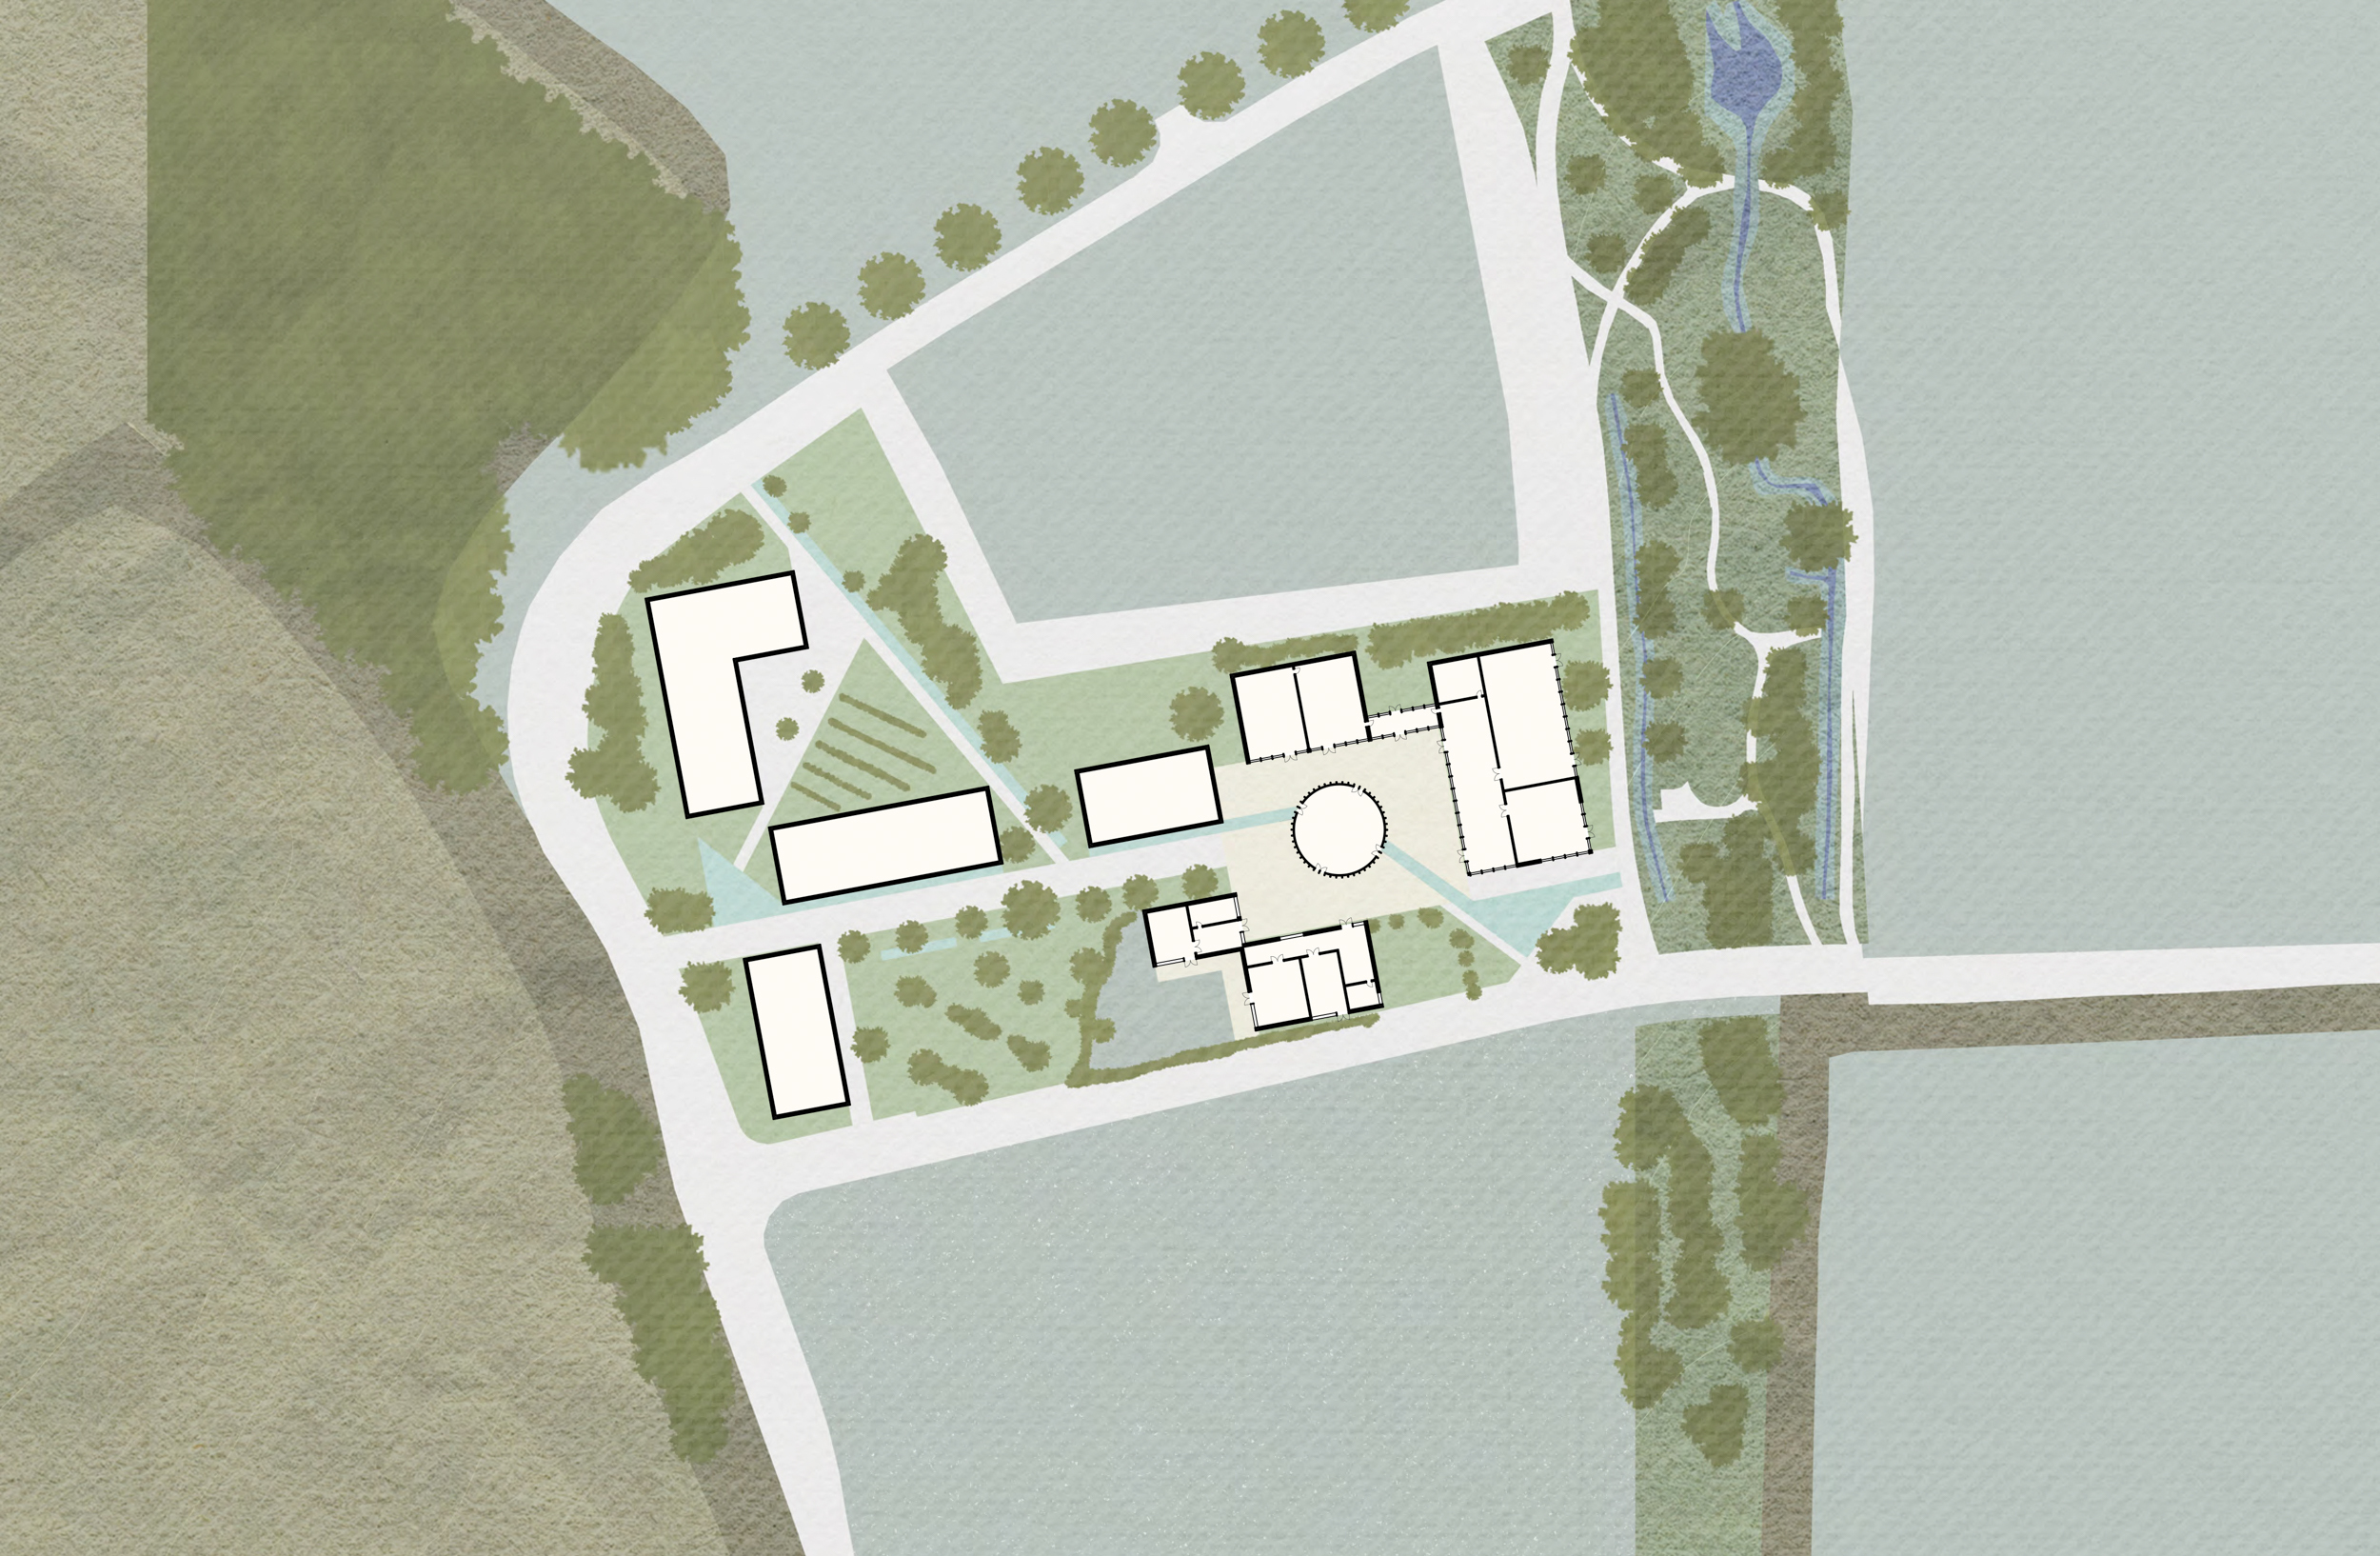 A beacon in courtyards site plan | Cambridge architects CDC Studio